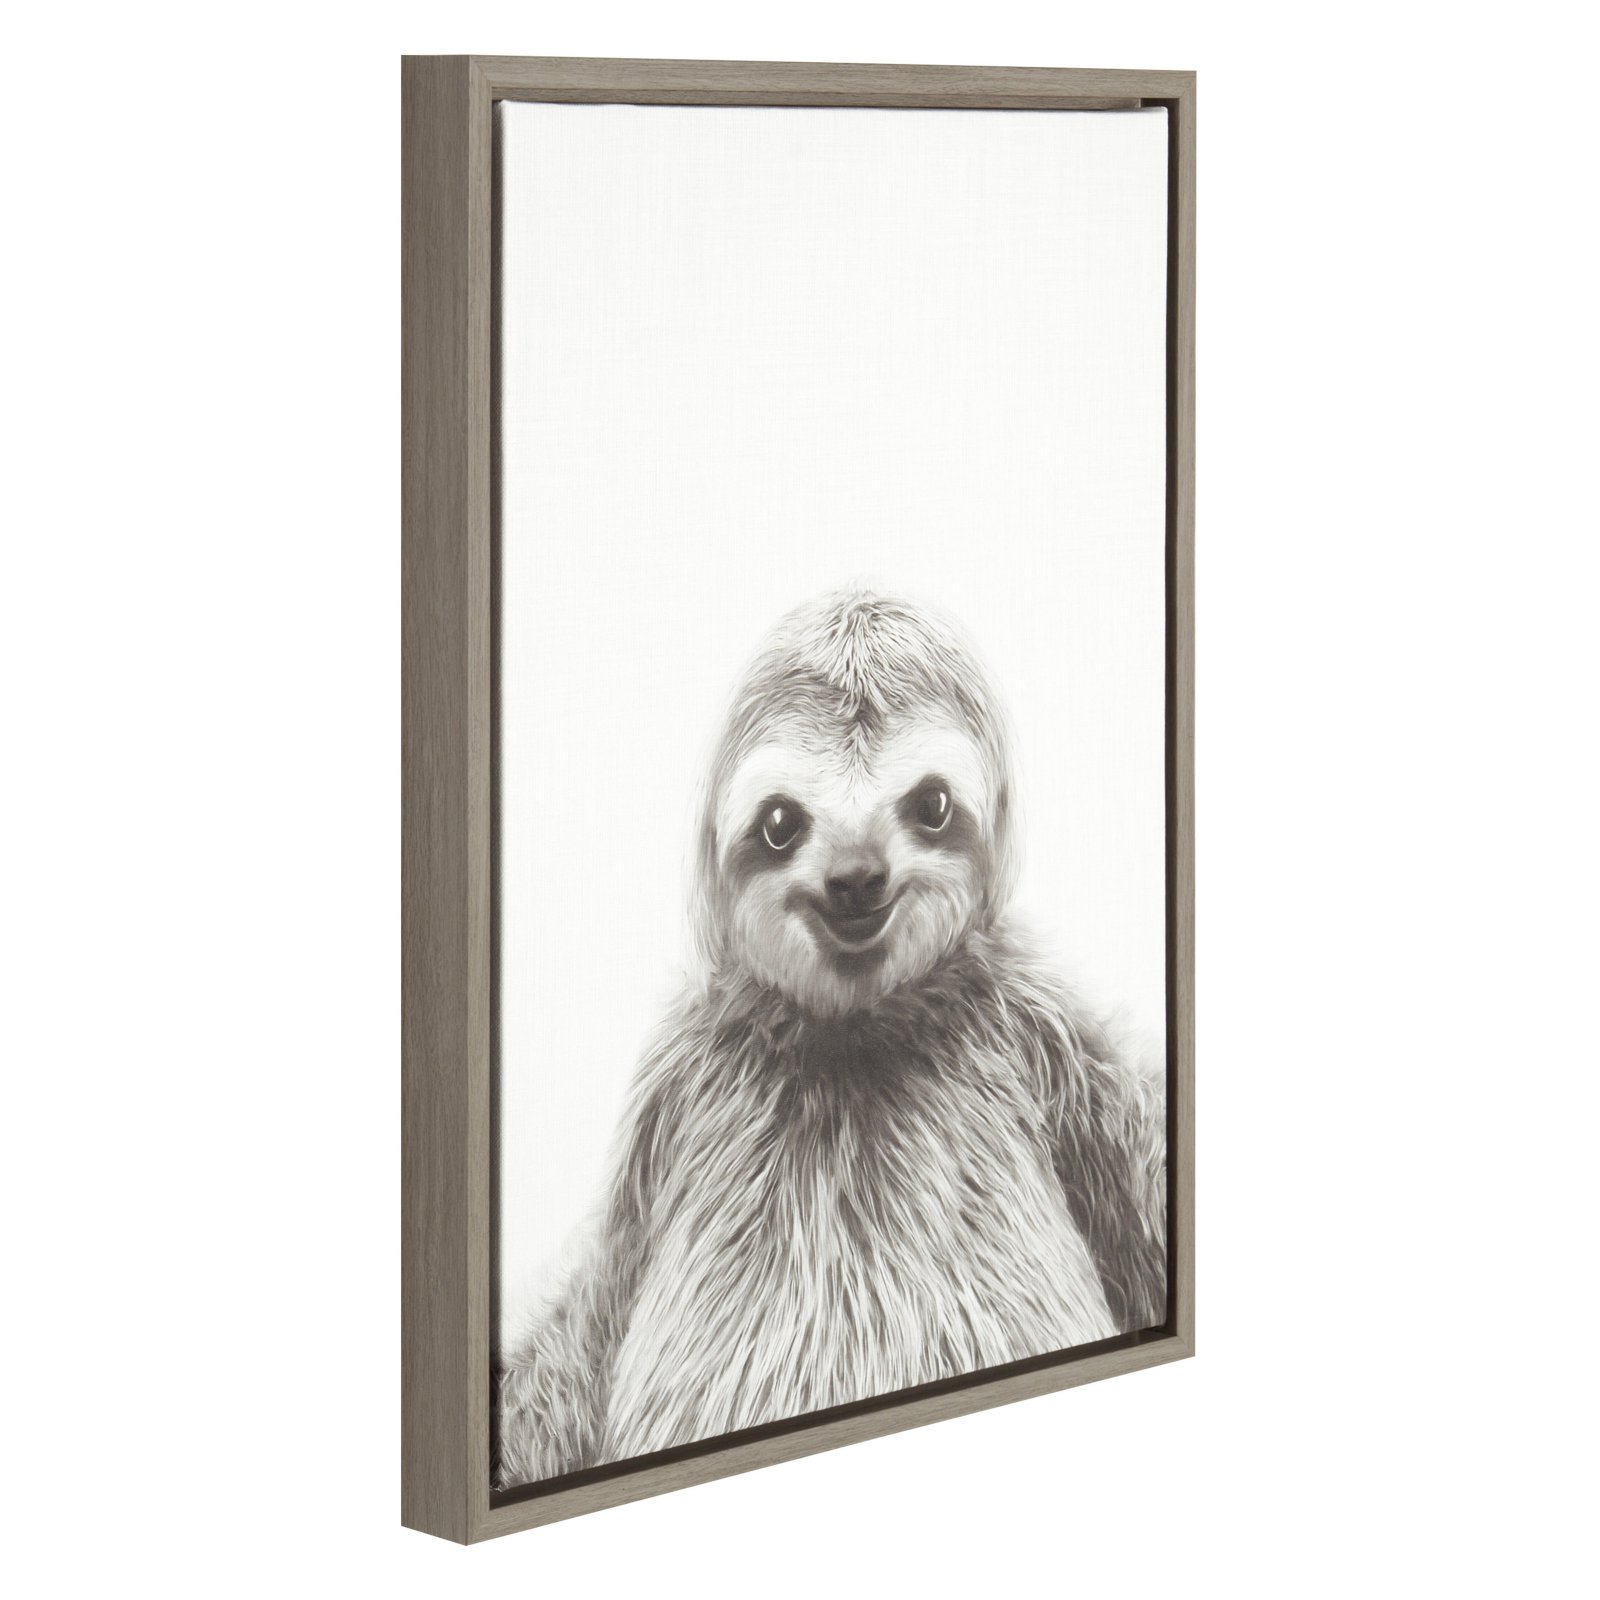 Kate and Laurel Sylvie Sloth Black and White Portrait Framed Canvas Wall Art  by Simon Te Tai, 18x24 Gray